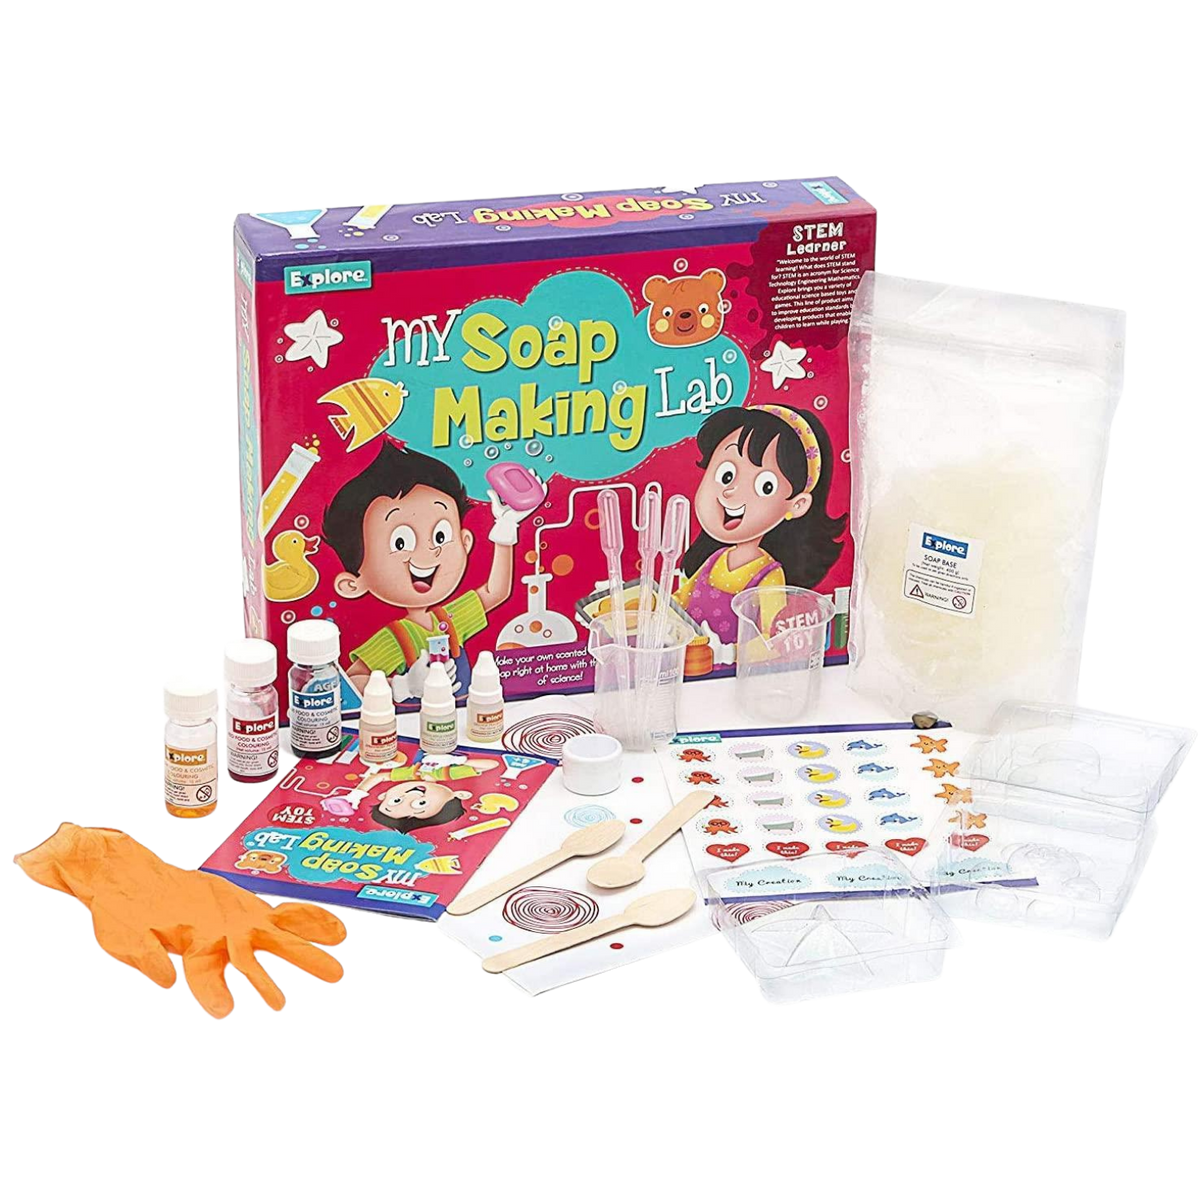 Marvelous Magic Kit Learning Page – Magic Makers